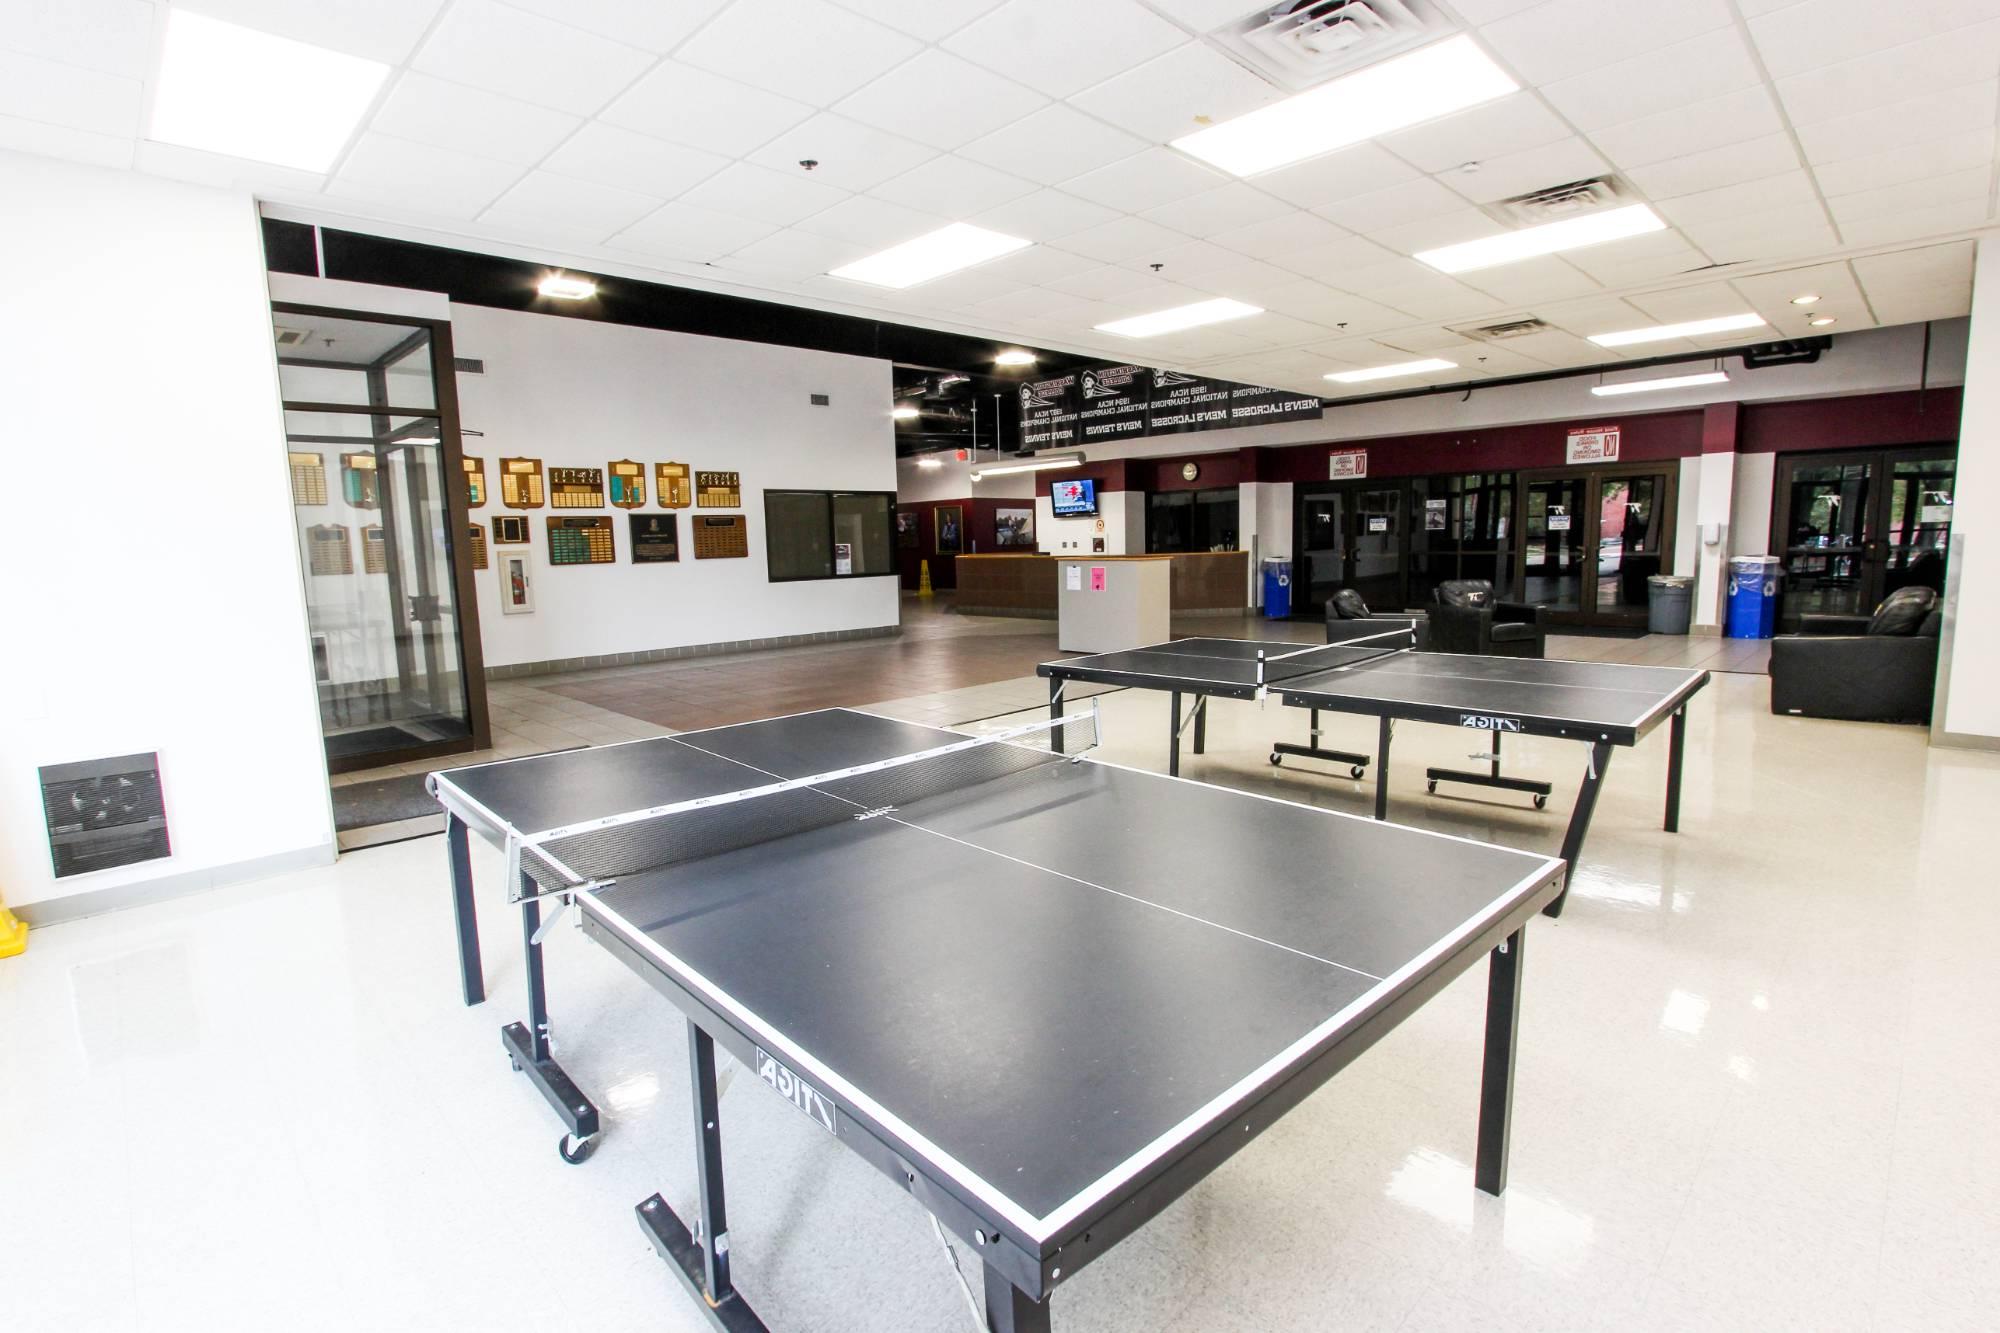 ping pong tables in fitness center